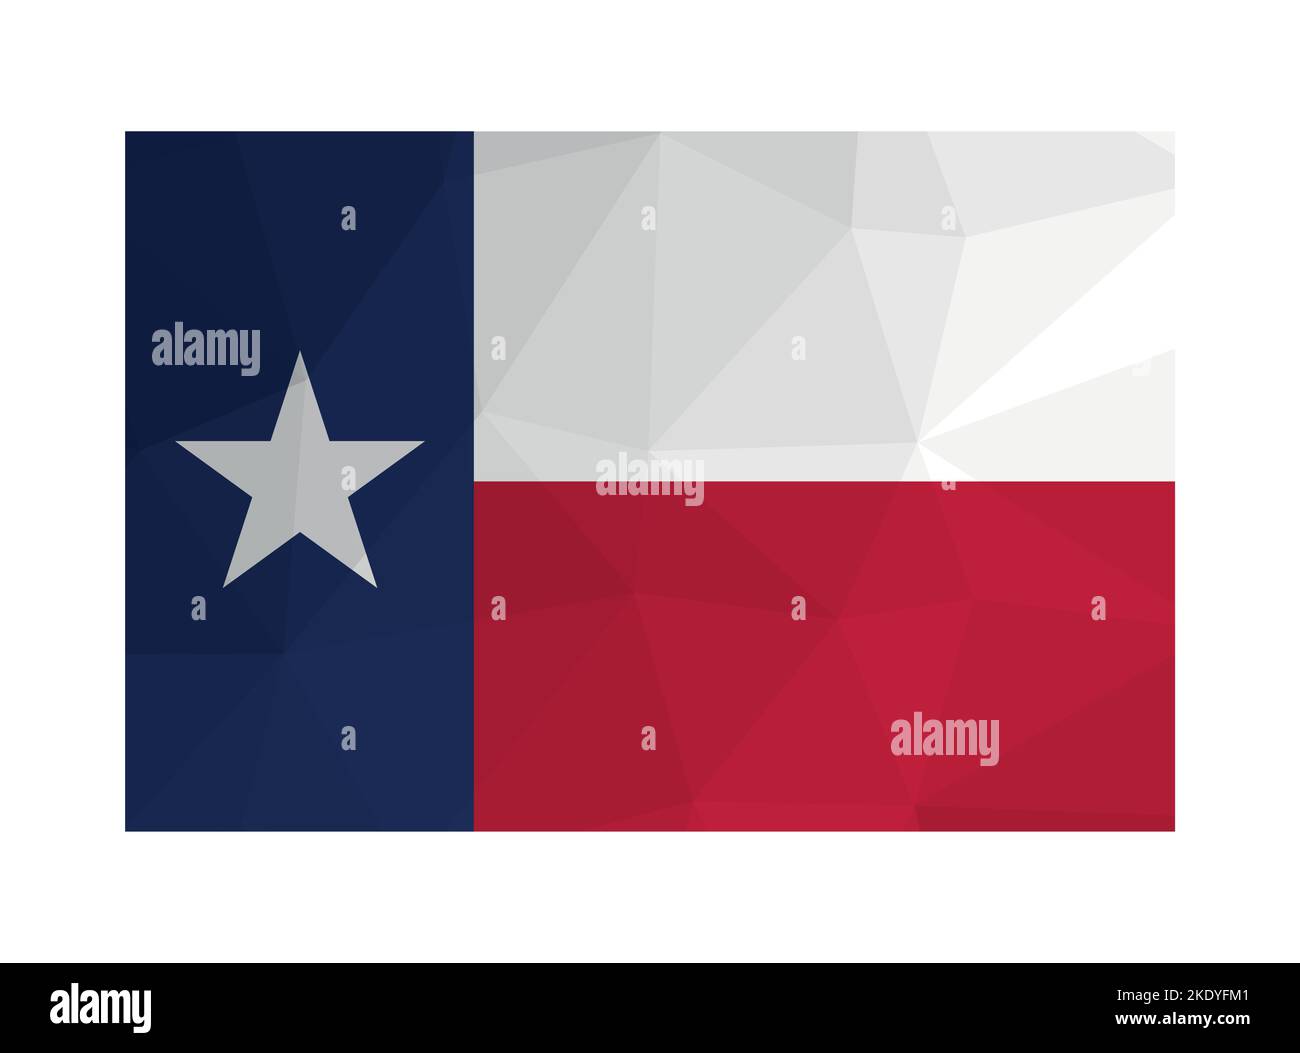 Vector illustration. Official ensign of Texas (USA state). National flag with star and blue, white, red stripes. Creative design in polygonal style wi Stock Vector